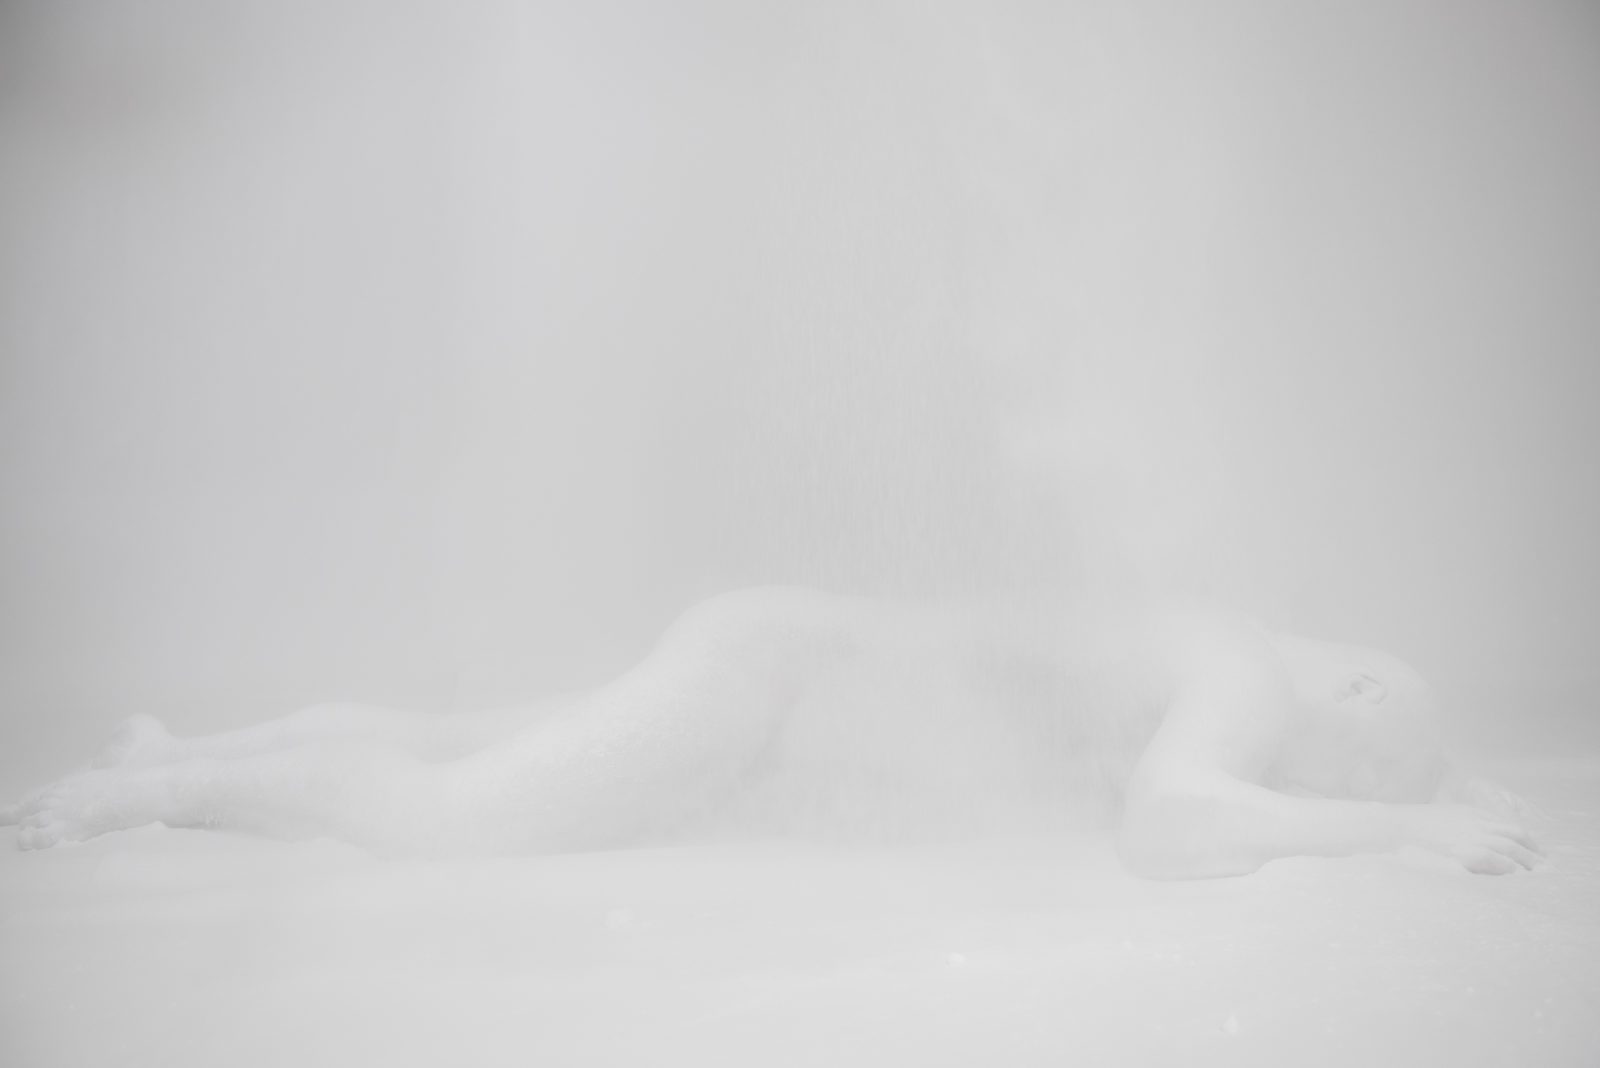 A man is lying down on his side in an all white room. He is covered in white powder, and the room is cloudy with the white poweder so you can only just see him.